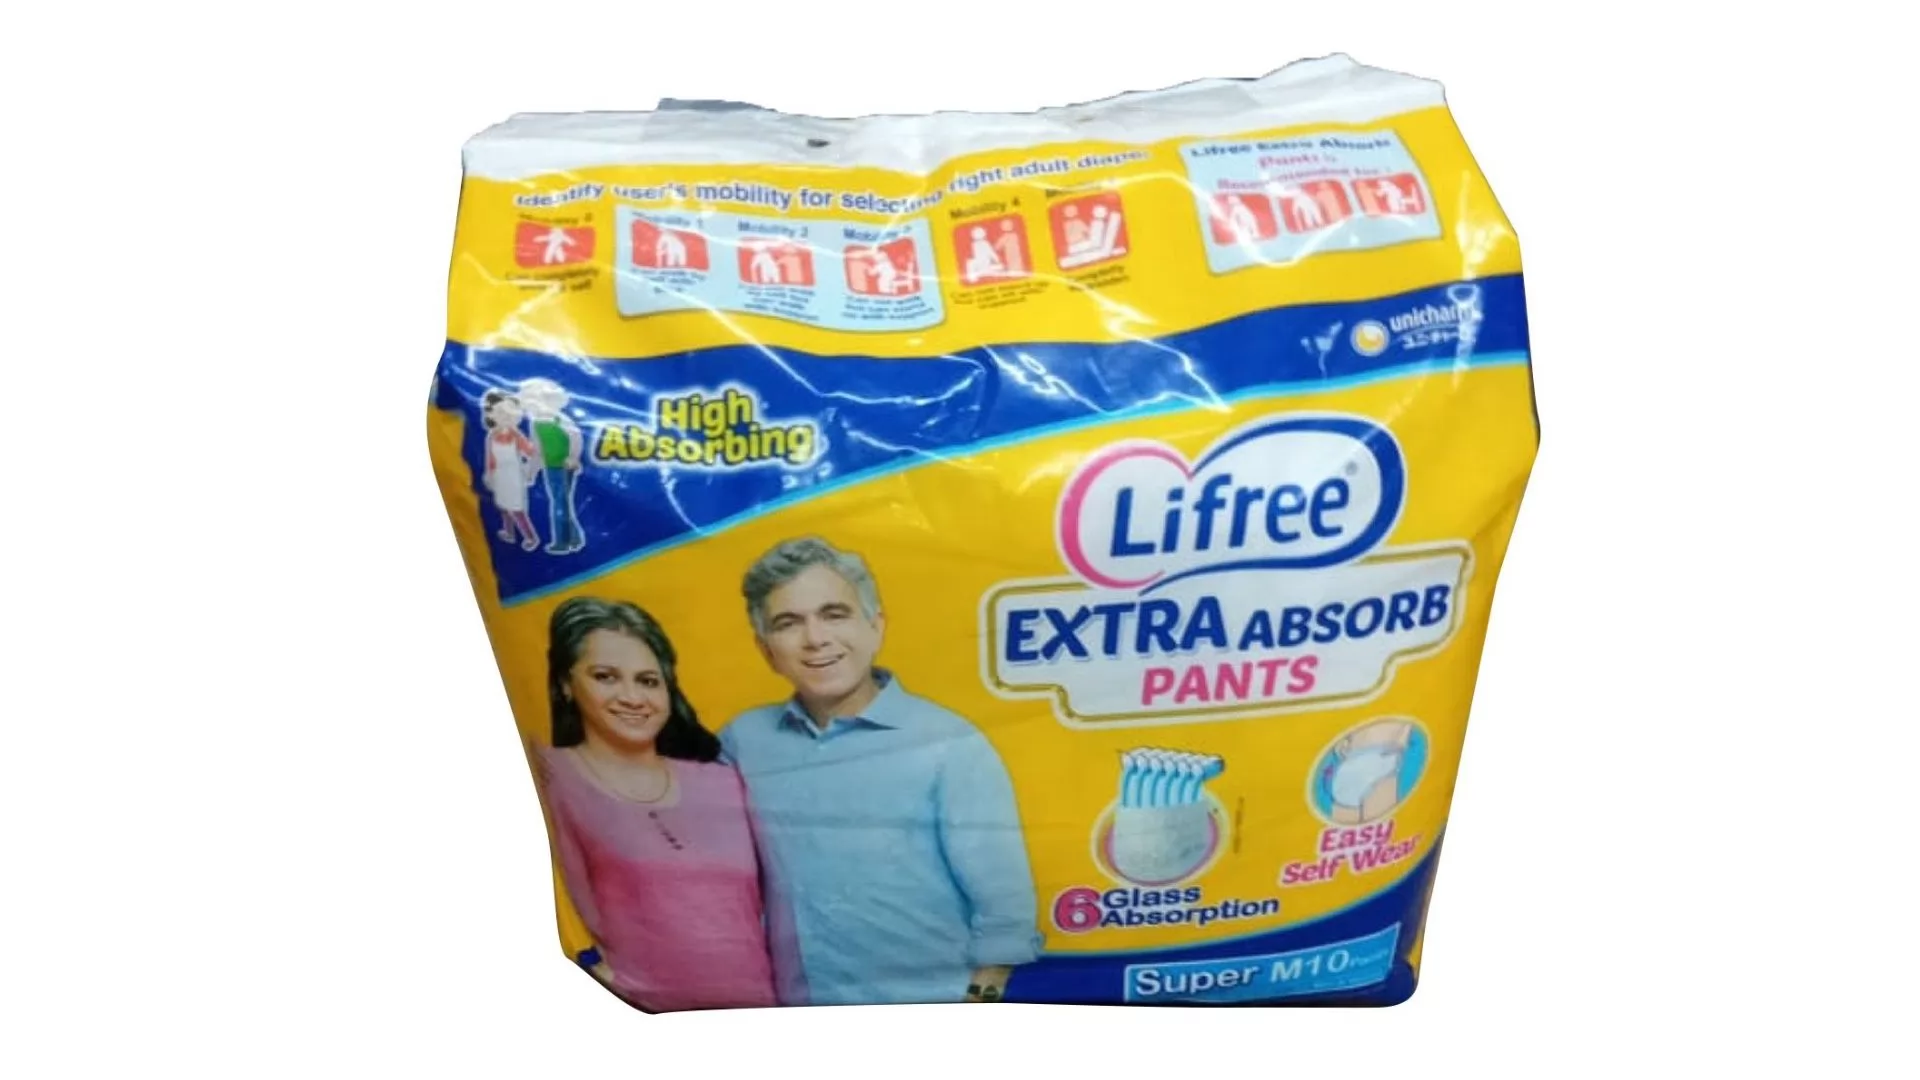 Lifree Extra Absorb Adult Diaper Pants Unisex